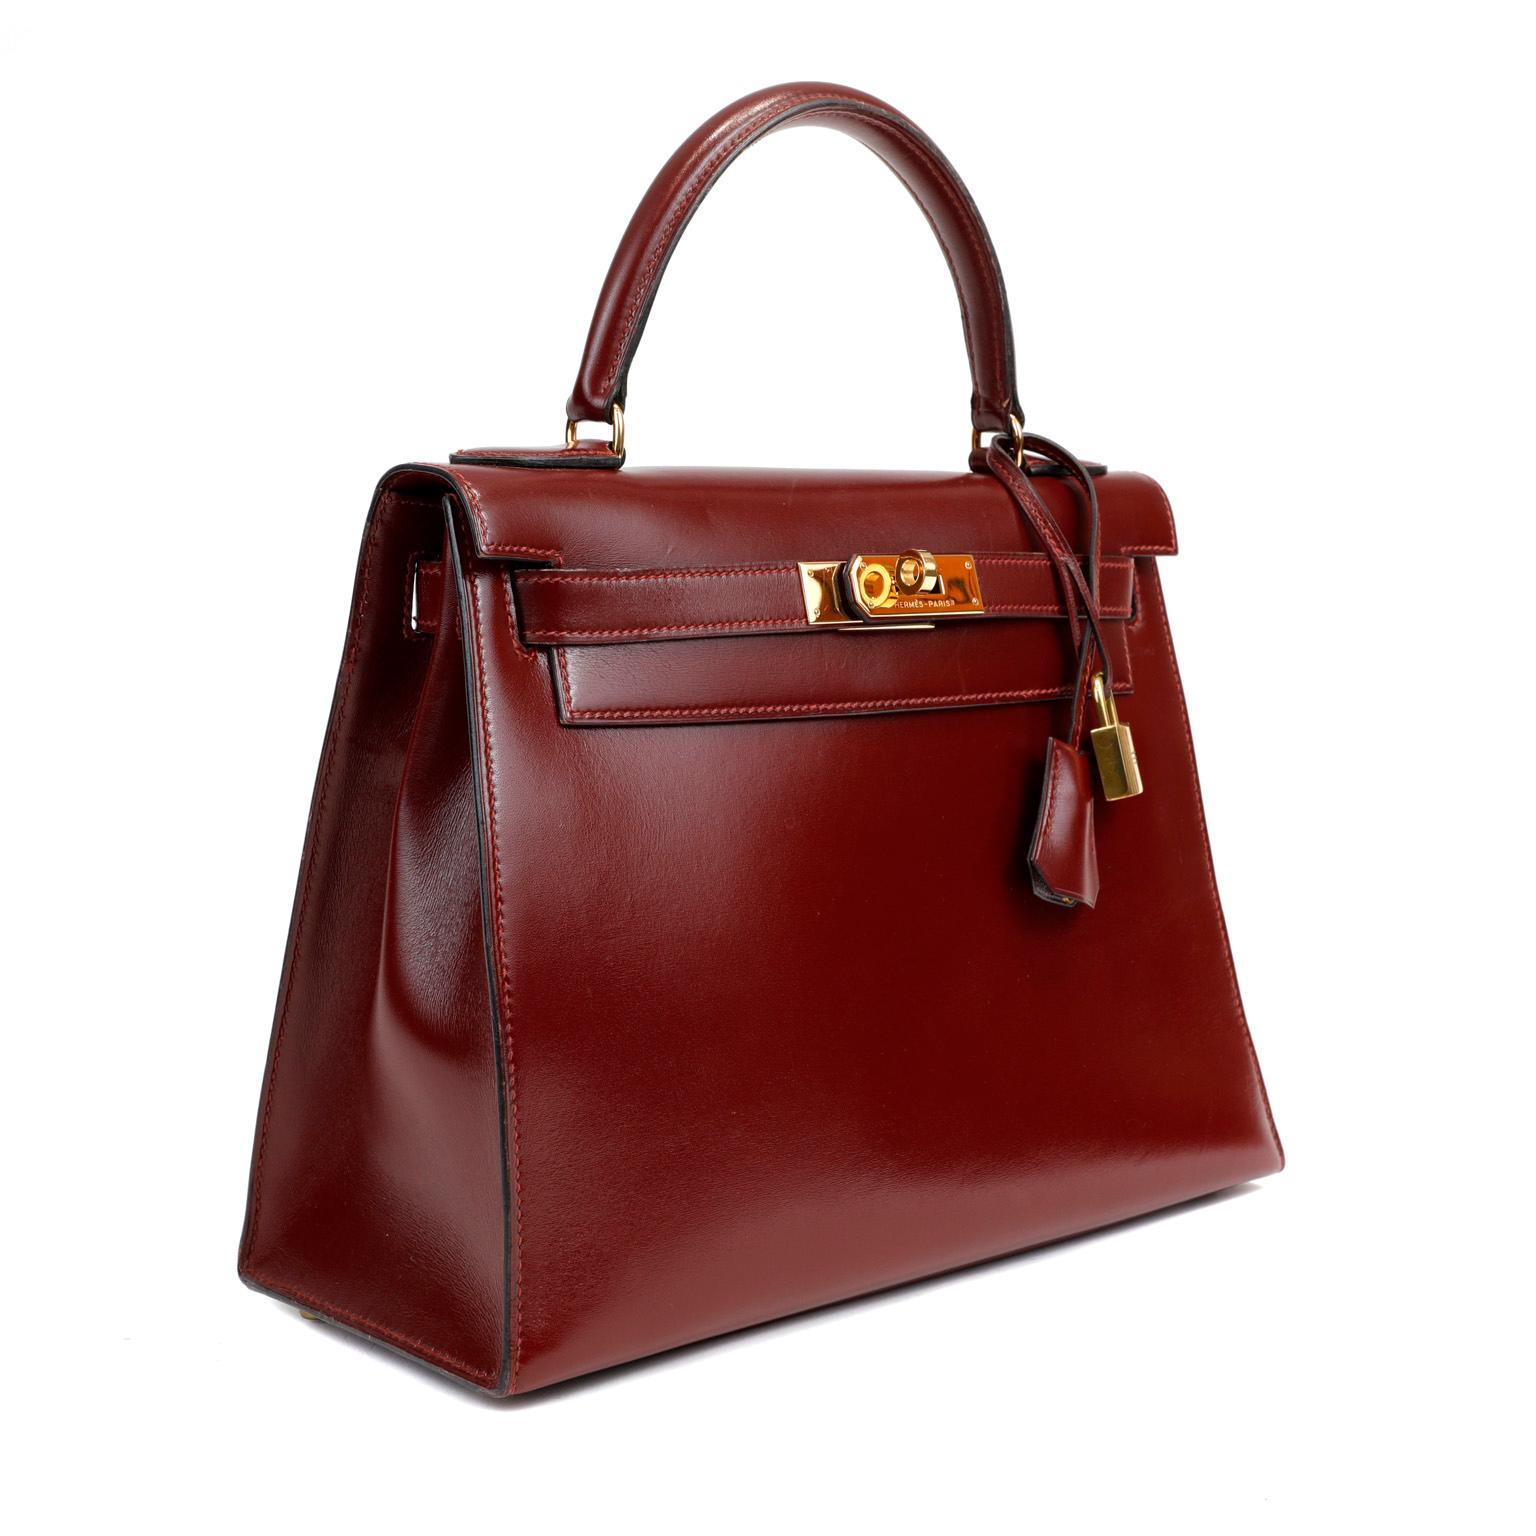 This authentic Hermès Dark Red Box Calf 28 cm Kelly is in excellent vintage condition. Hermès bags are considered the ultimate luxury item worldwide. Each piece is handcrafted with waitlists that can exceed a year or more. The demure Kelly is